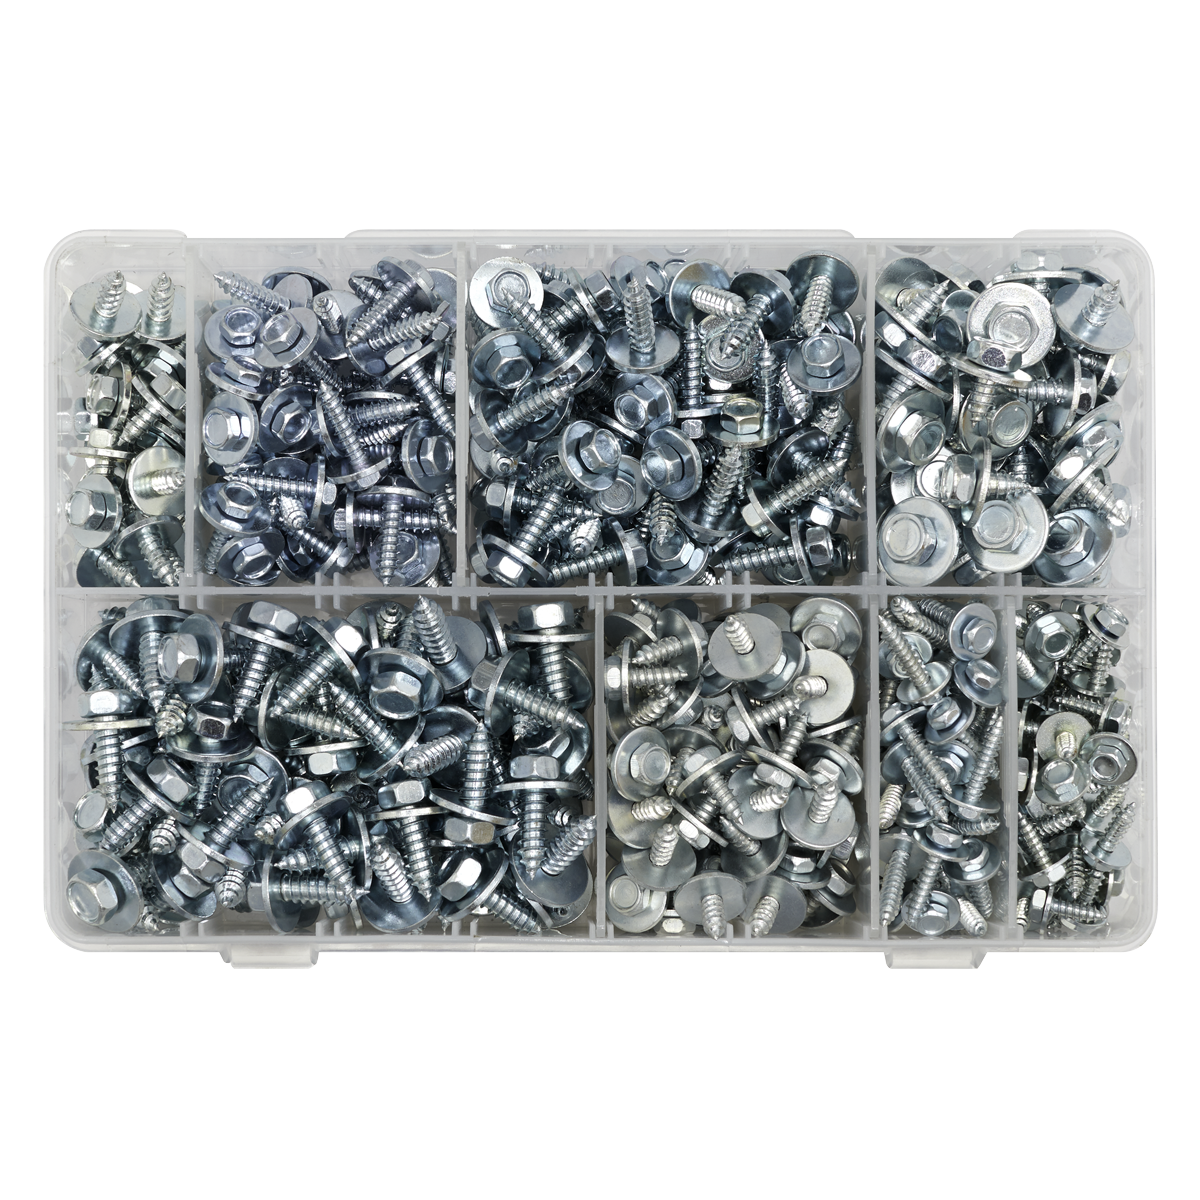 Acme Screw with Captive Washer Assortment 425pc - AB425AS - Farming Parts